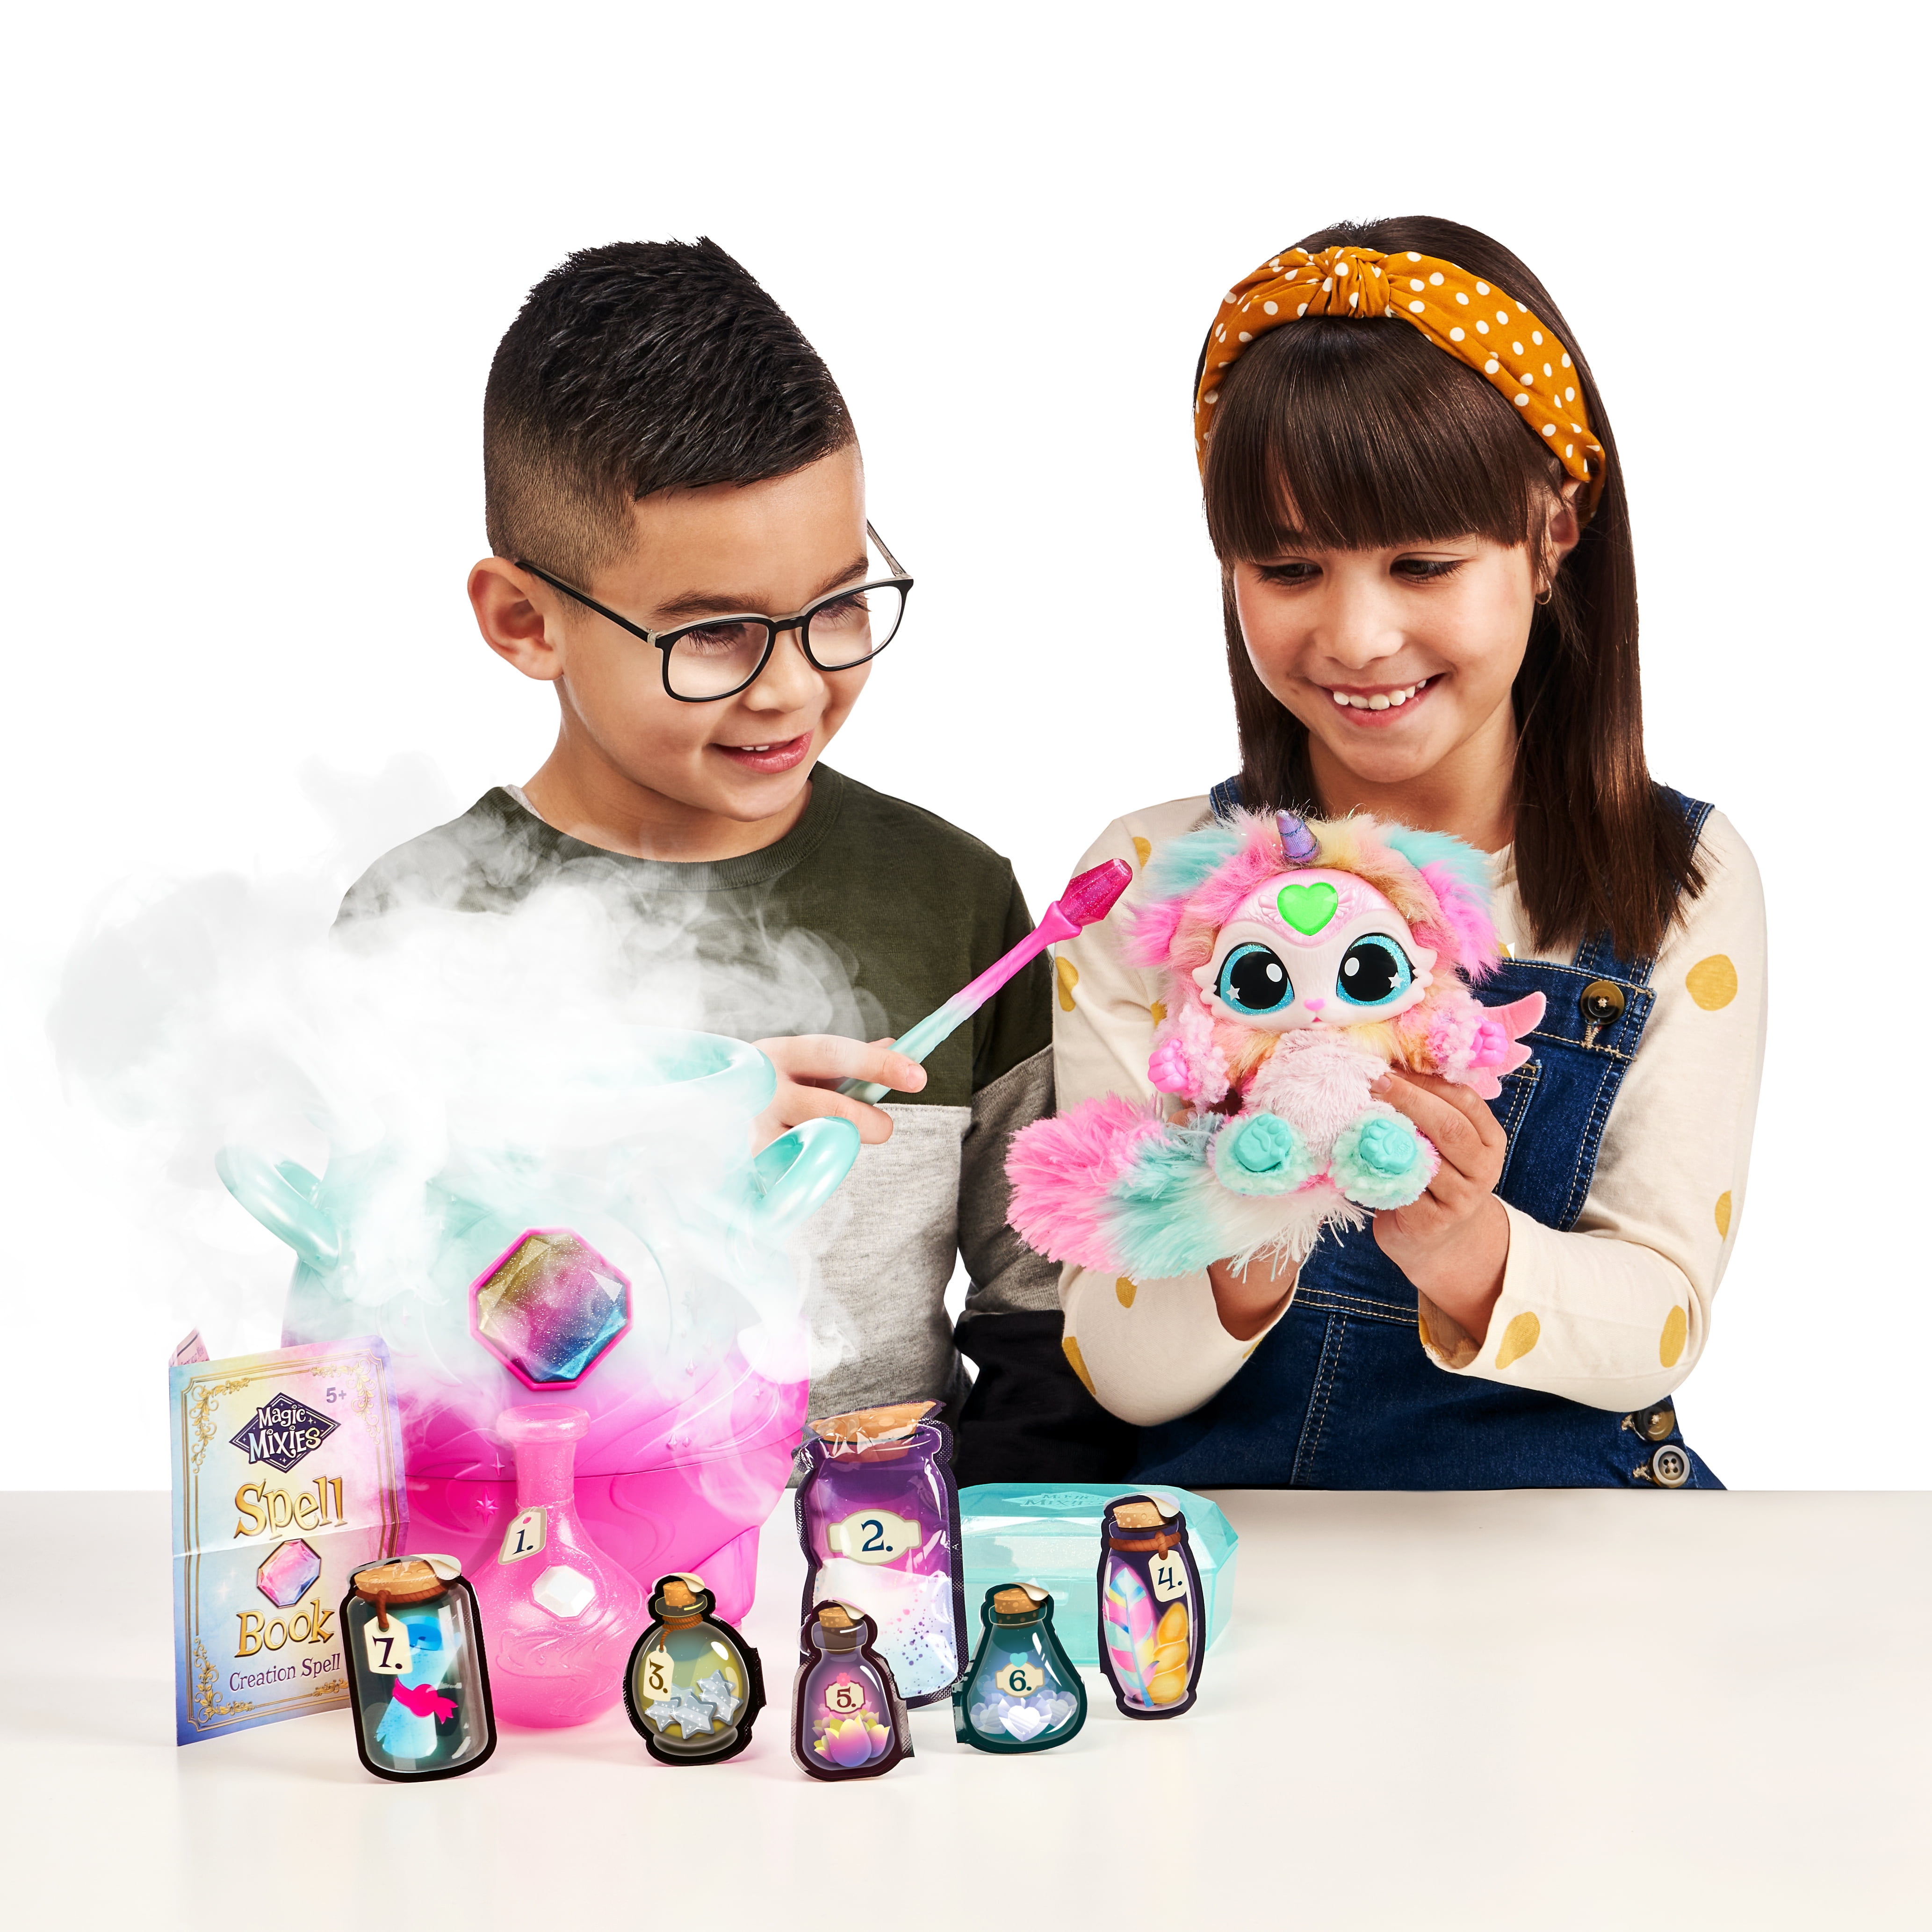 Magic Mixies Magical Misting Cauldron with Interactive 8 Pink Plush Toy –  New! – Tacos Y Mas